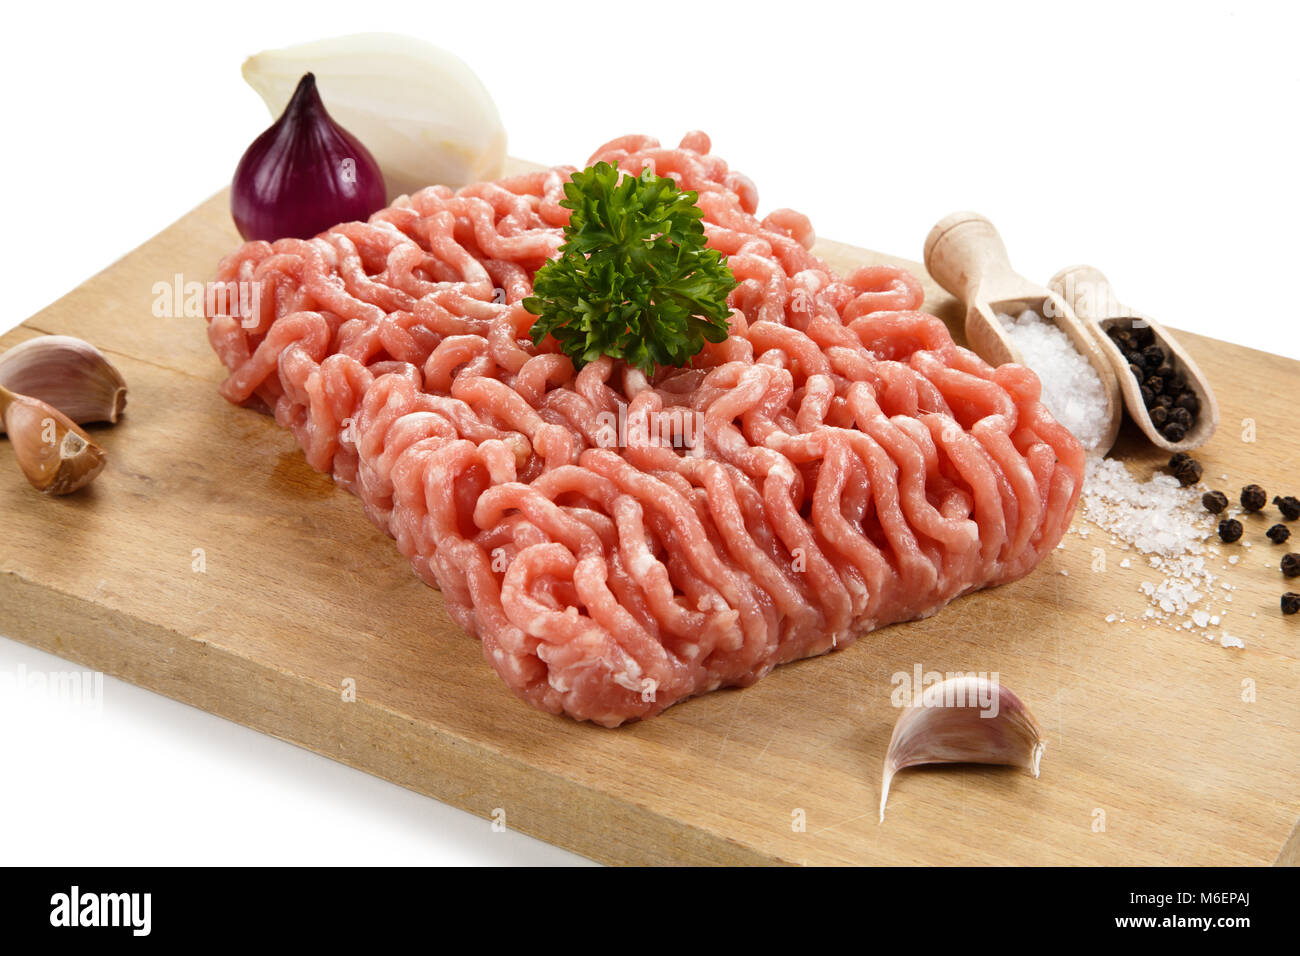 Raw minced pork on cutting board and vegetables Stock Photo